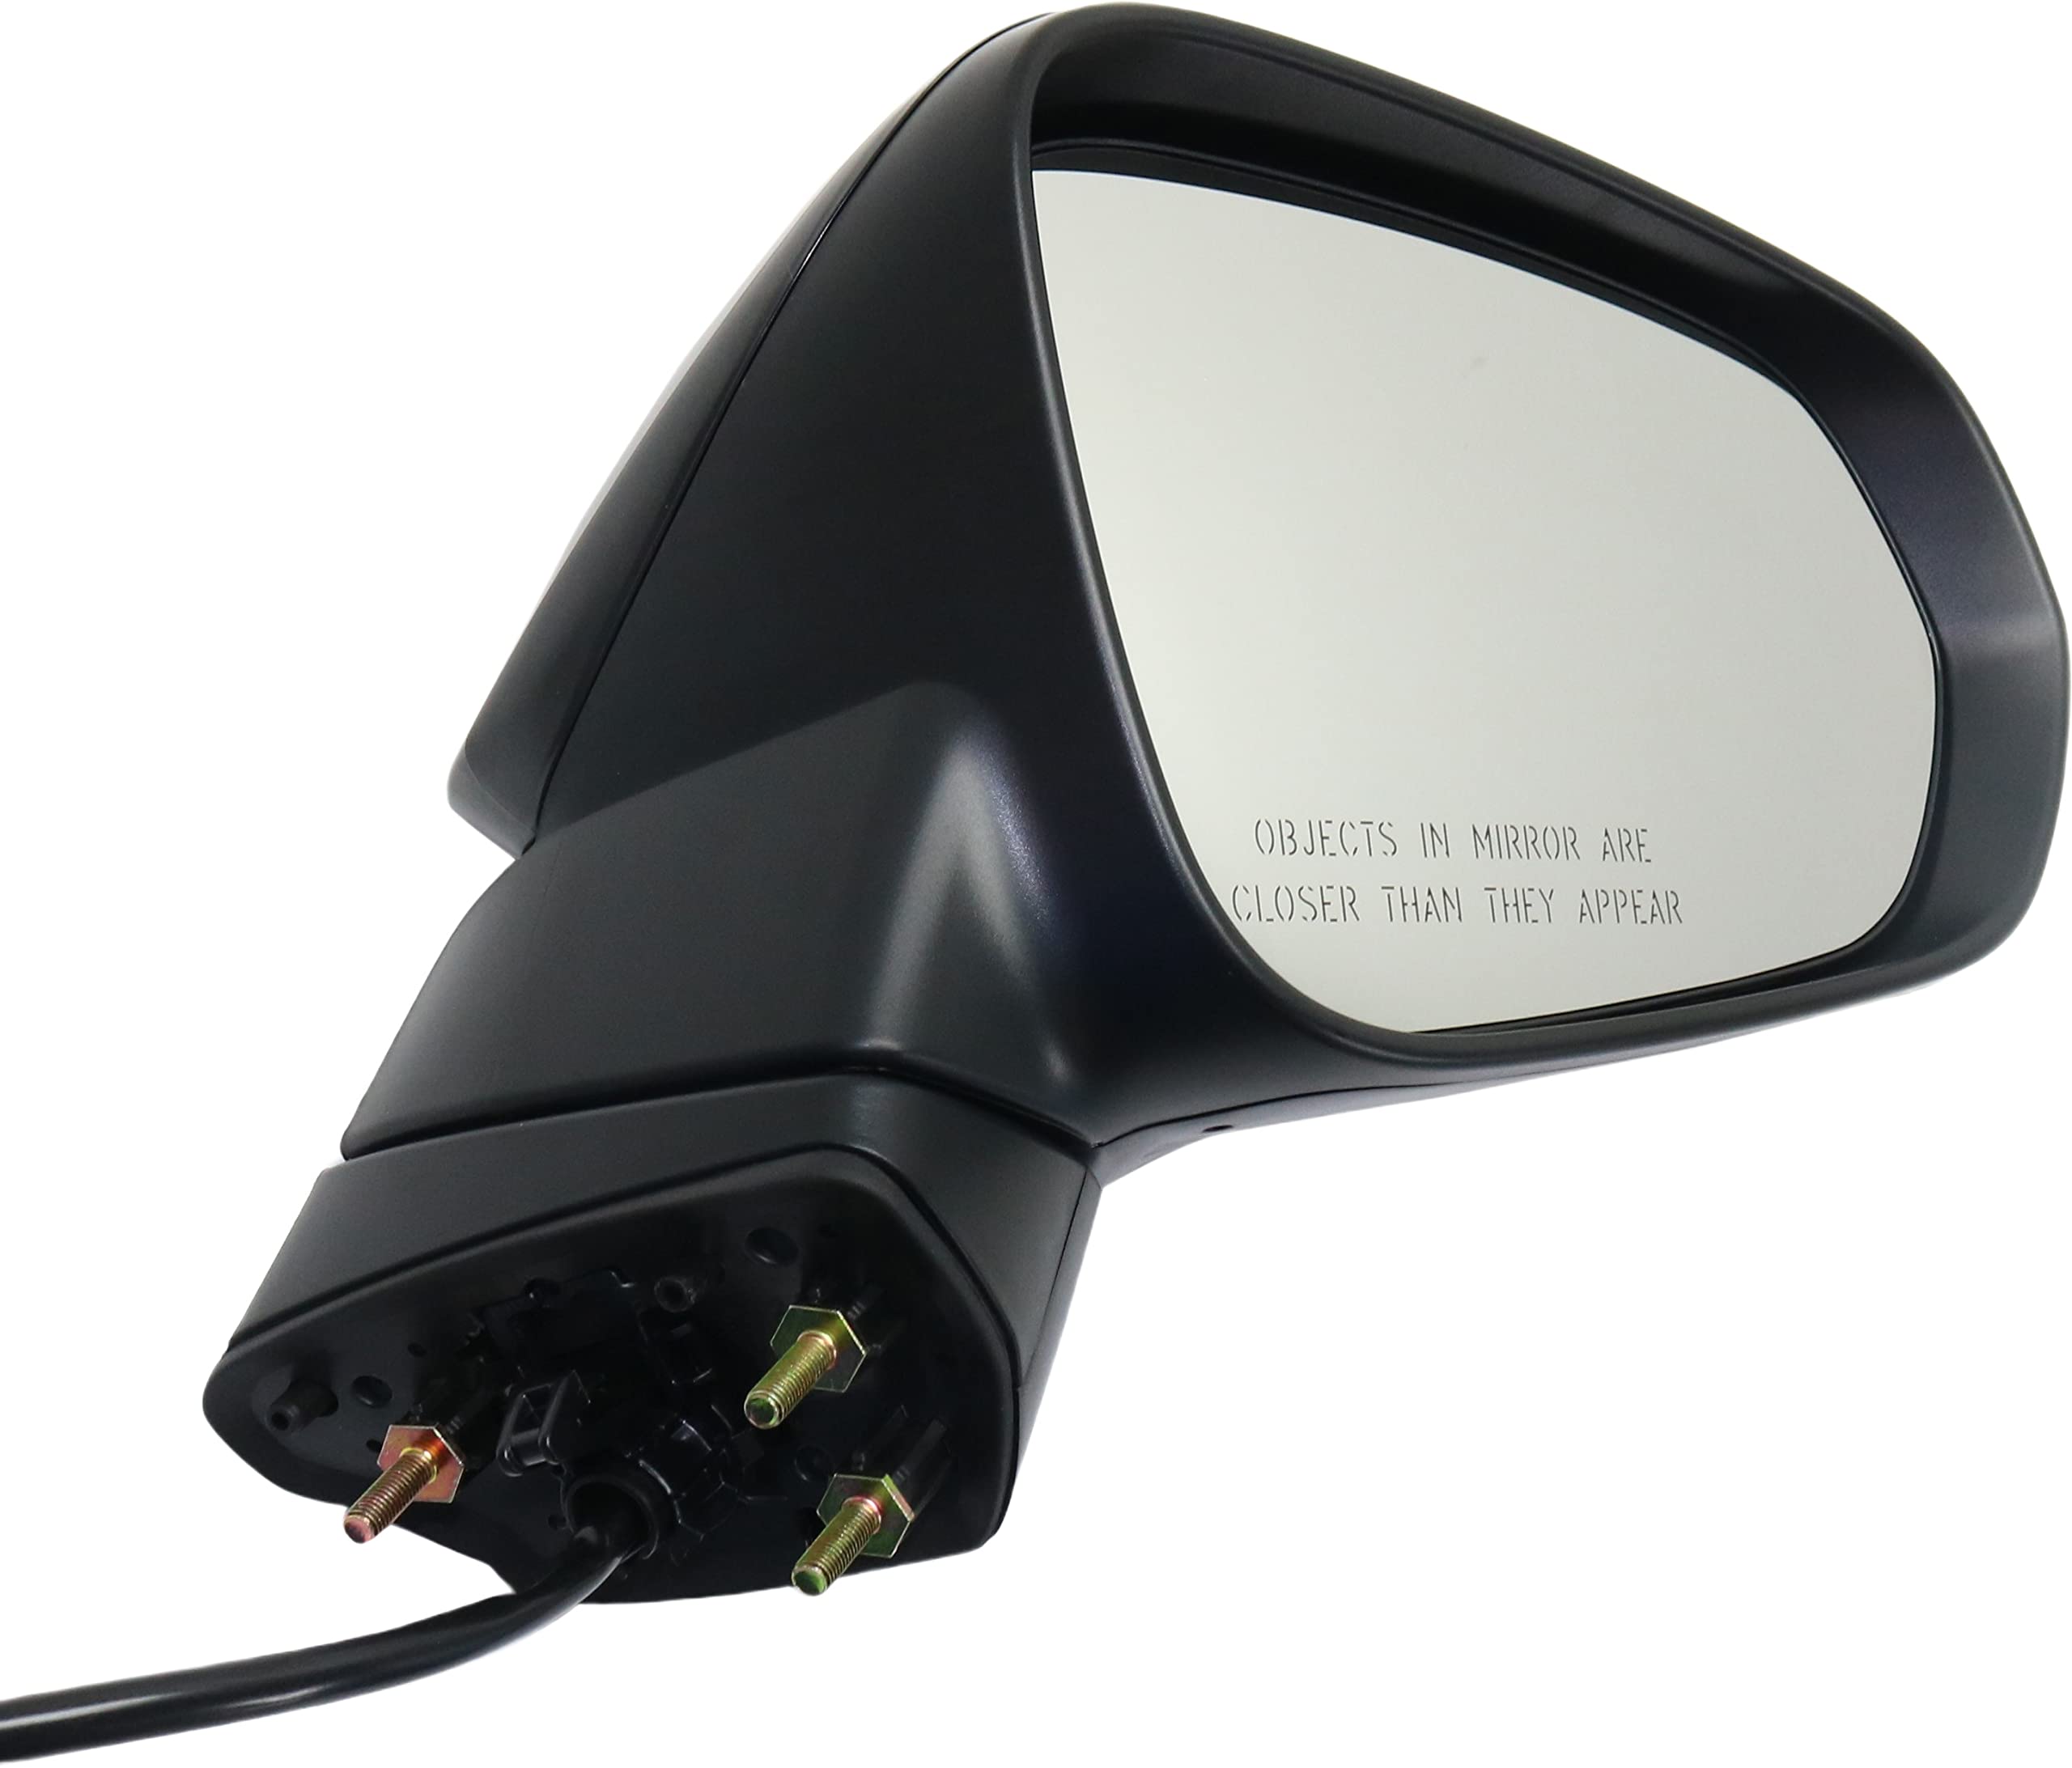 Affordable Lexus RX 350 side mirror replacement cost